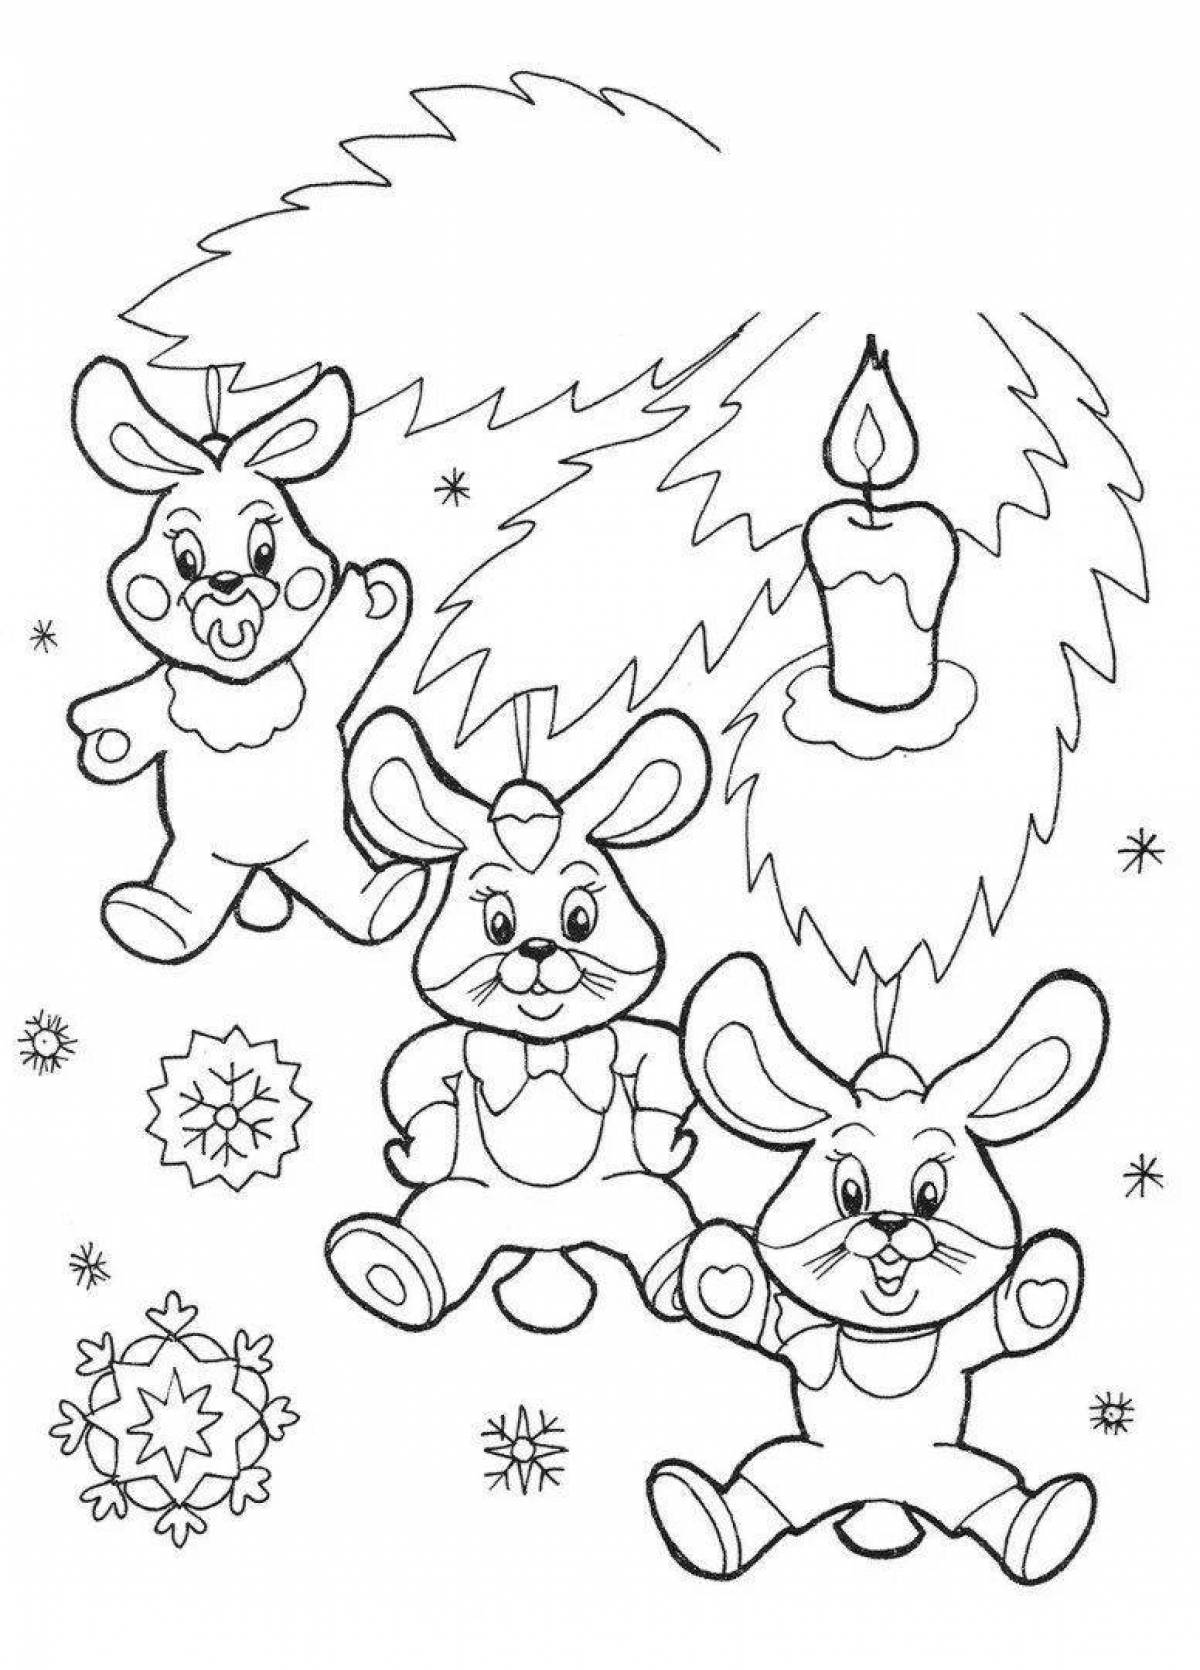 Delightful new year bunny coloring book